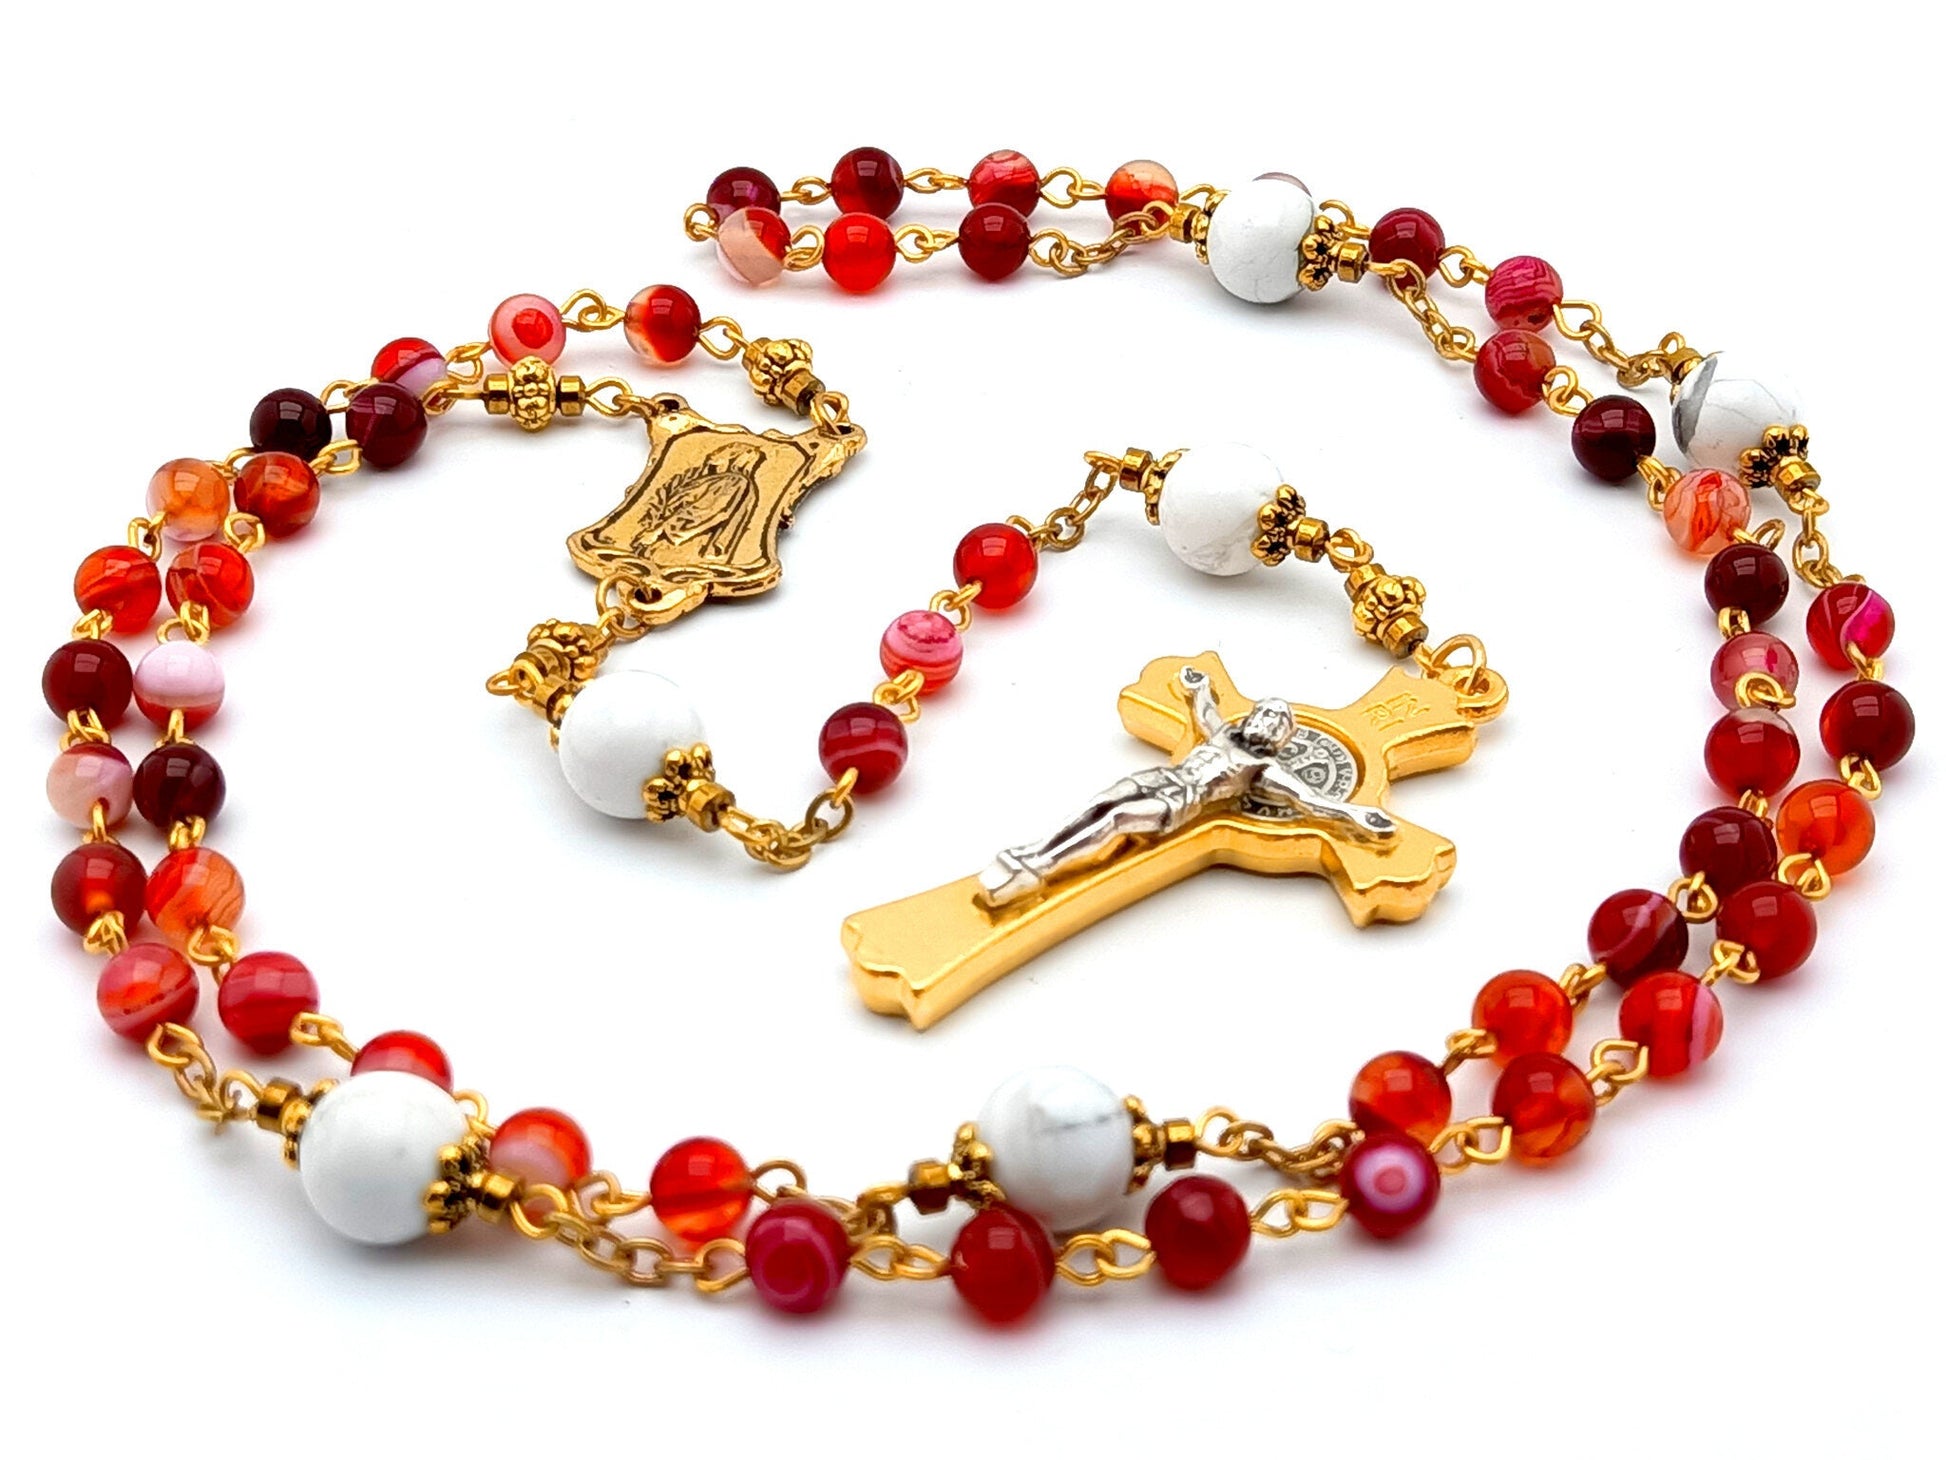 Saint John Vianney unique rosary beads with red agate and white gemstone beads, gold and silver Saint Benedict crucifix and small Saint Philomena centre medal.